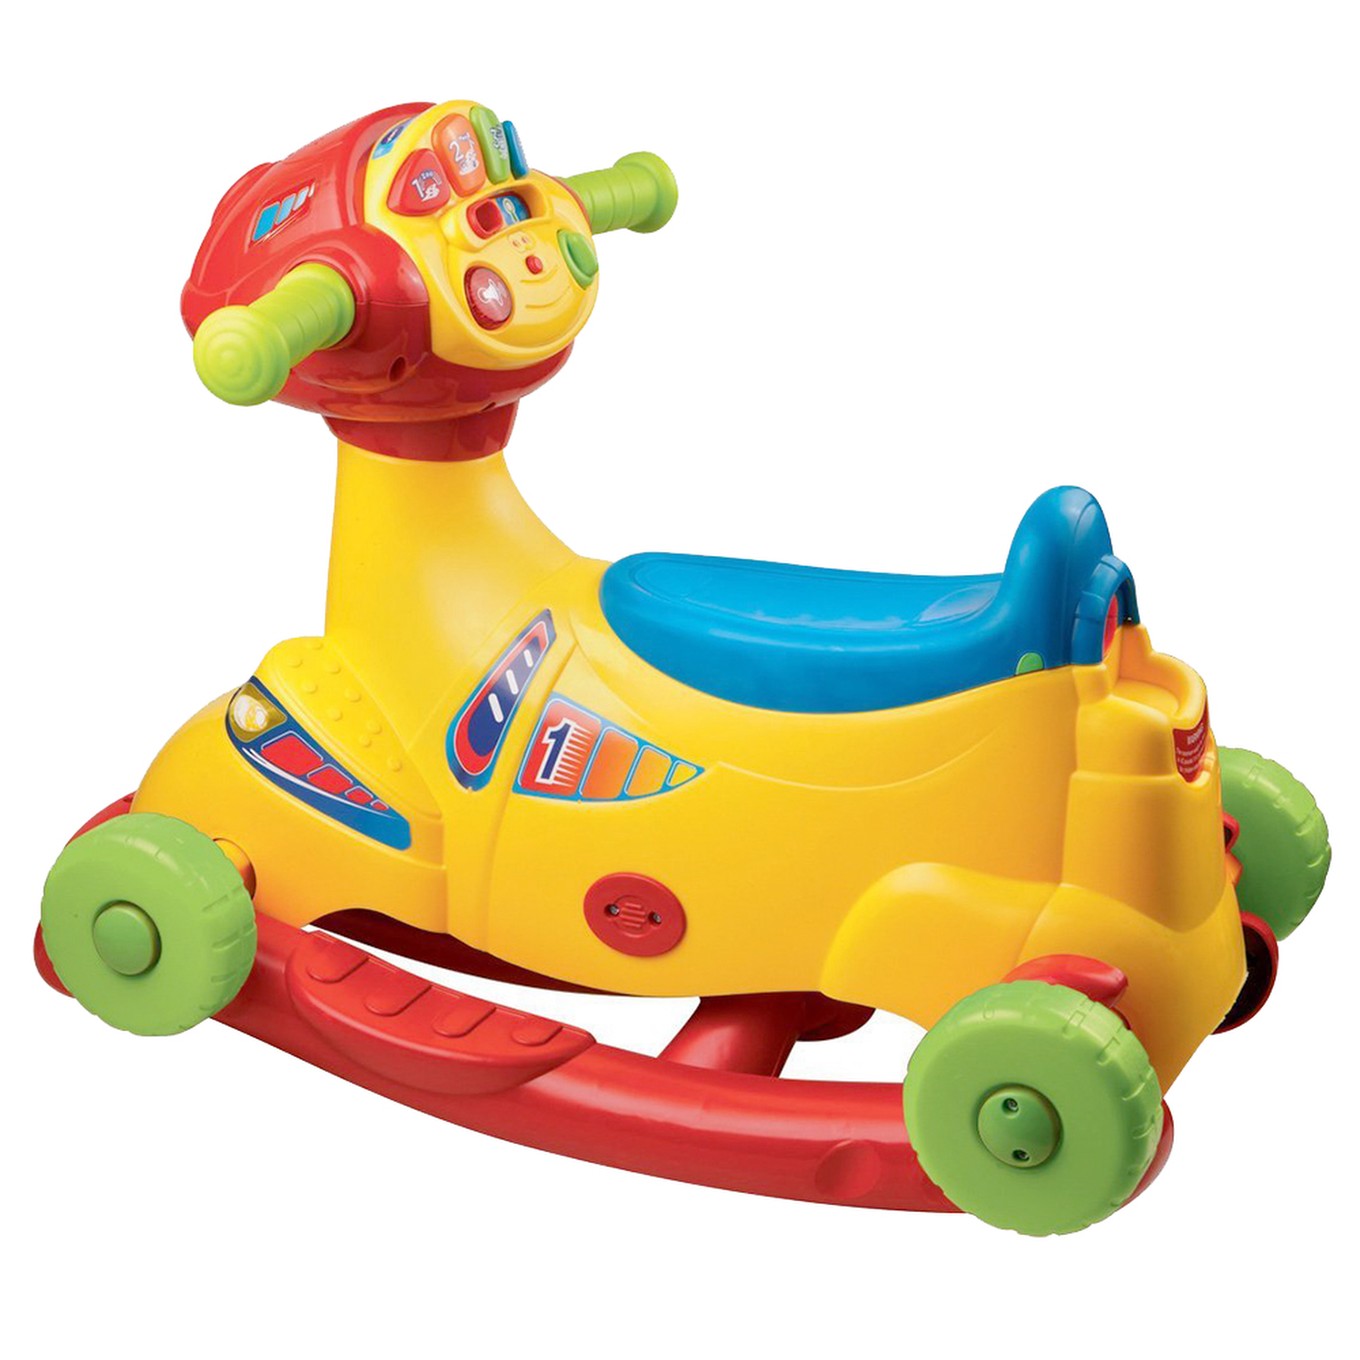 vtech 3 in 1 ride on